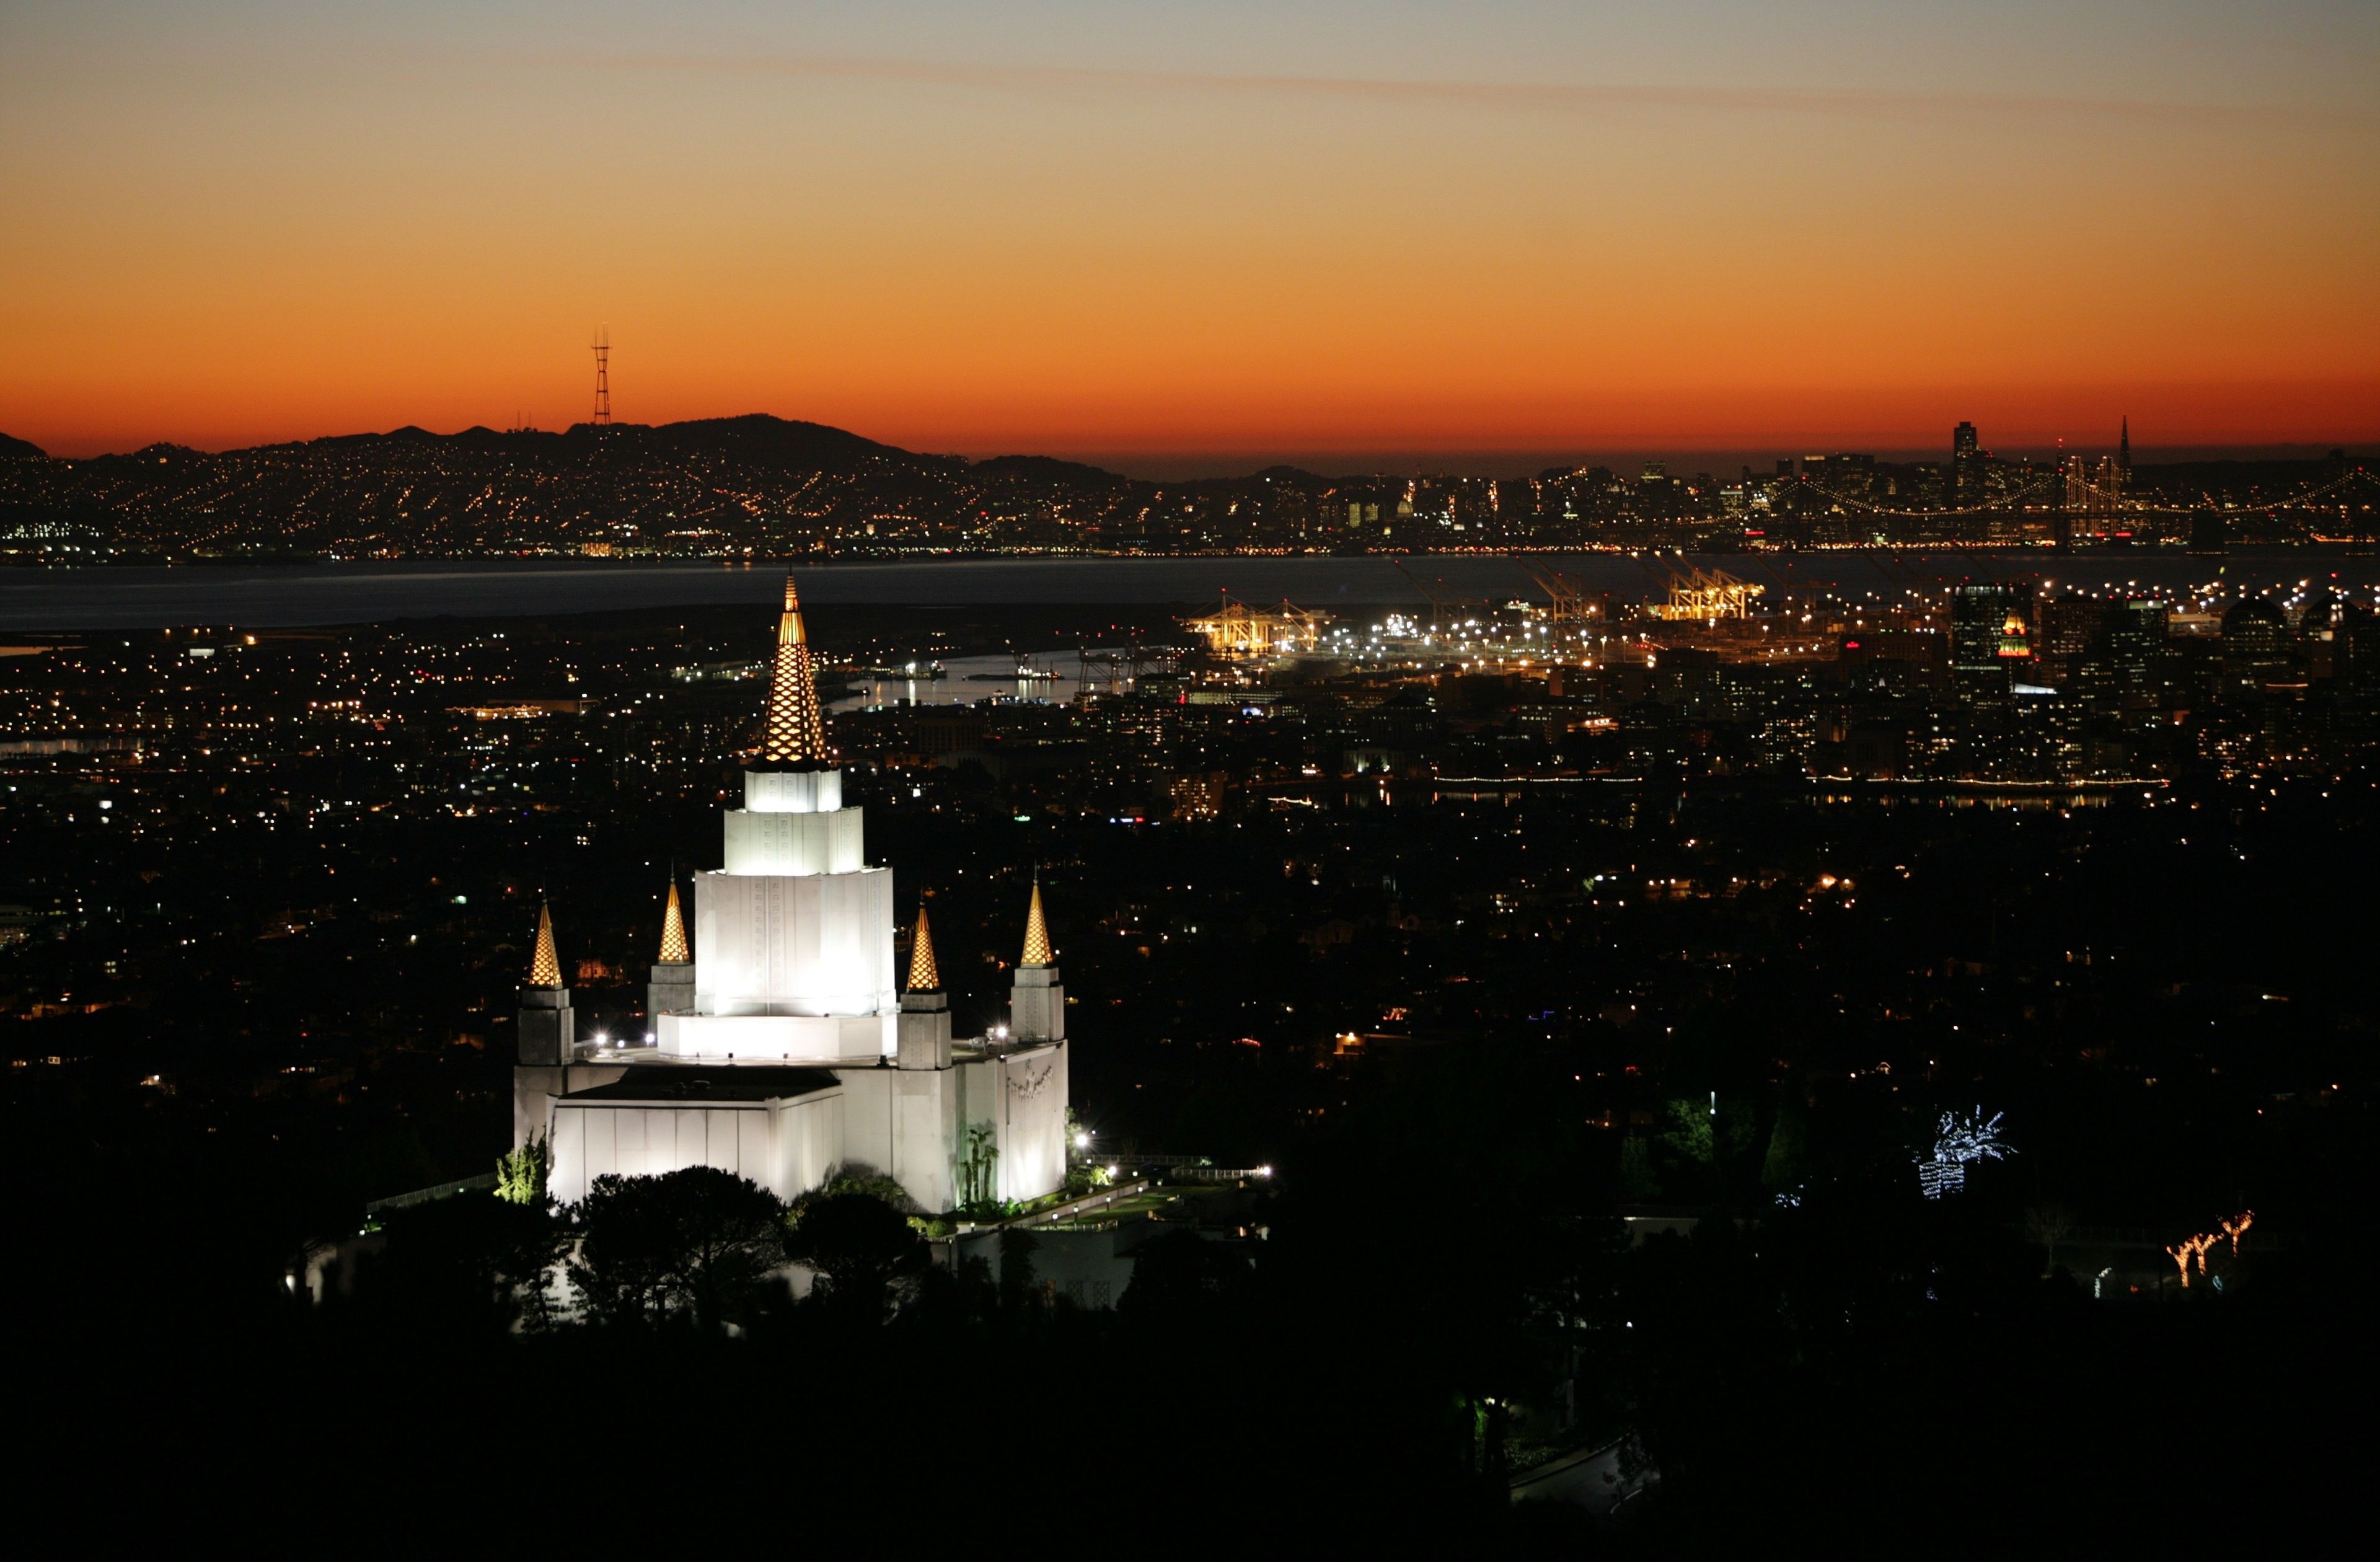 The Oakland California Temple in the evening, including the city.